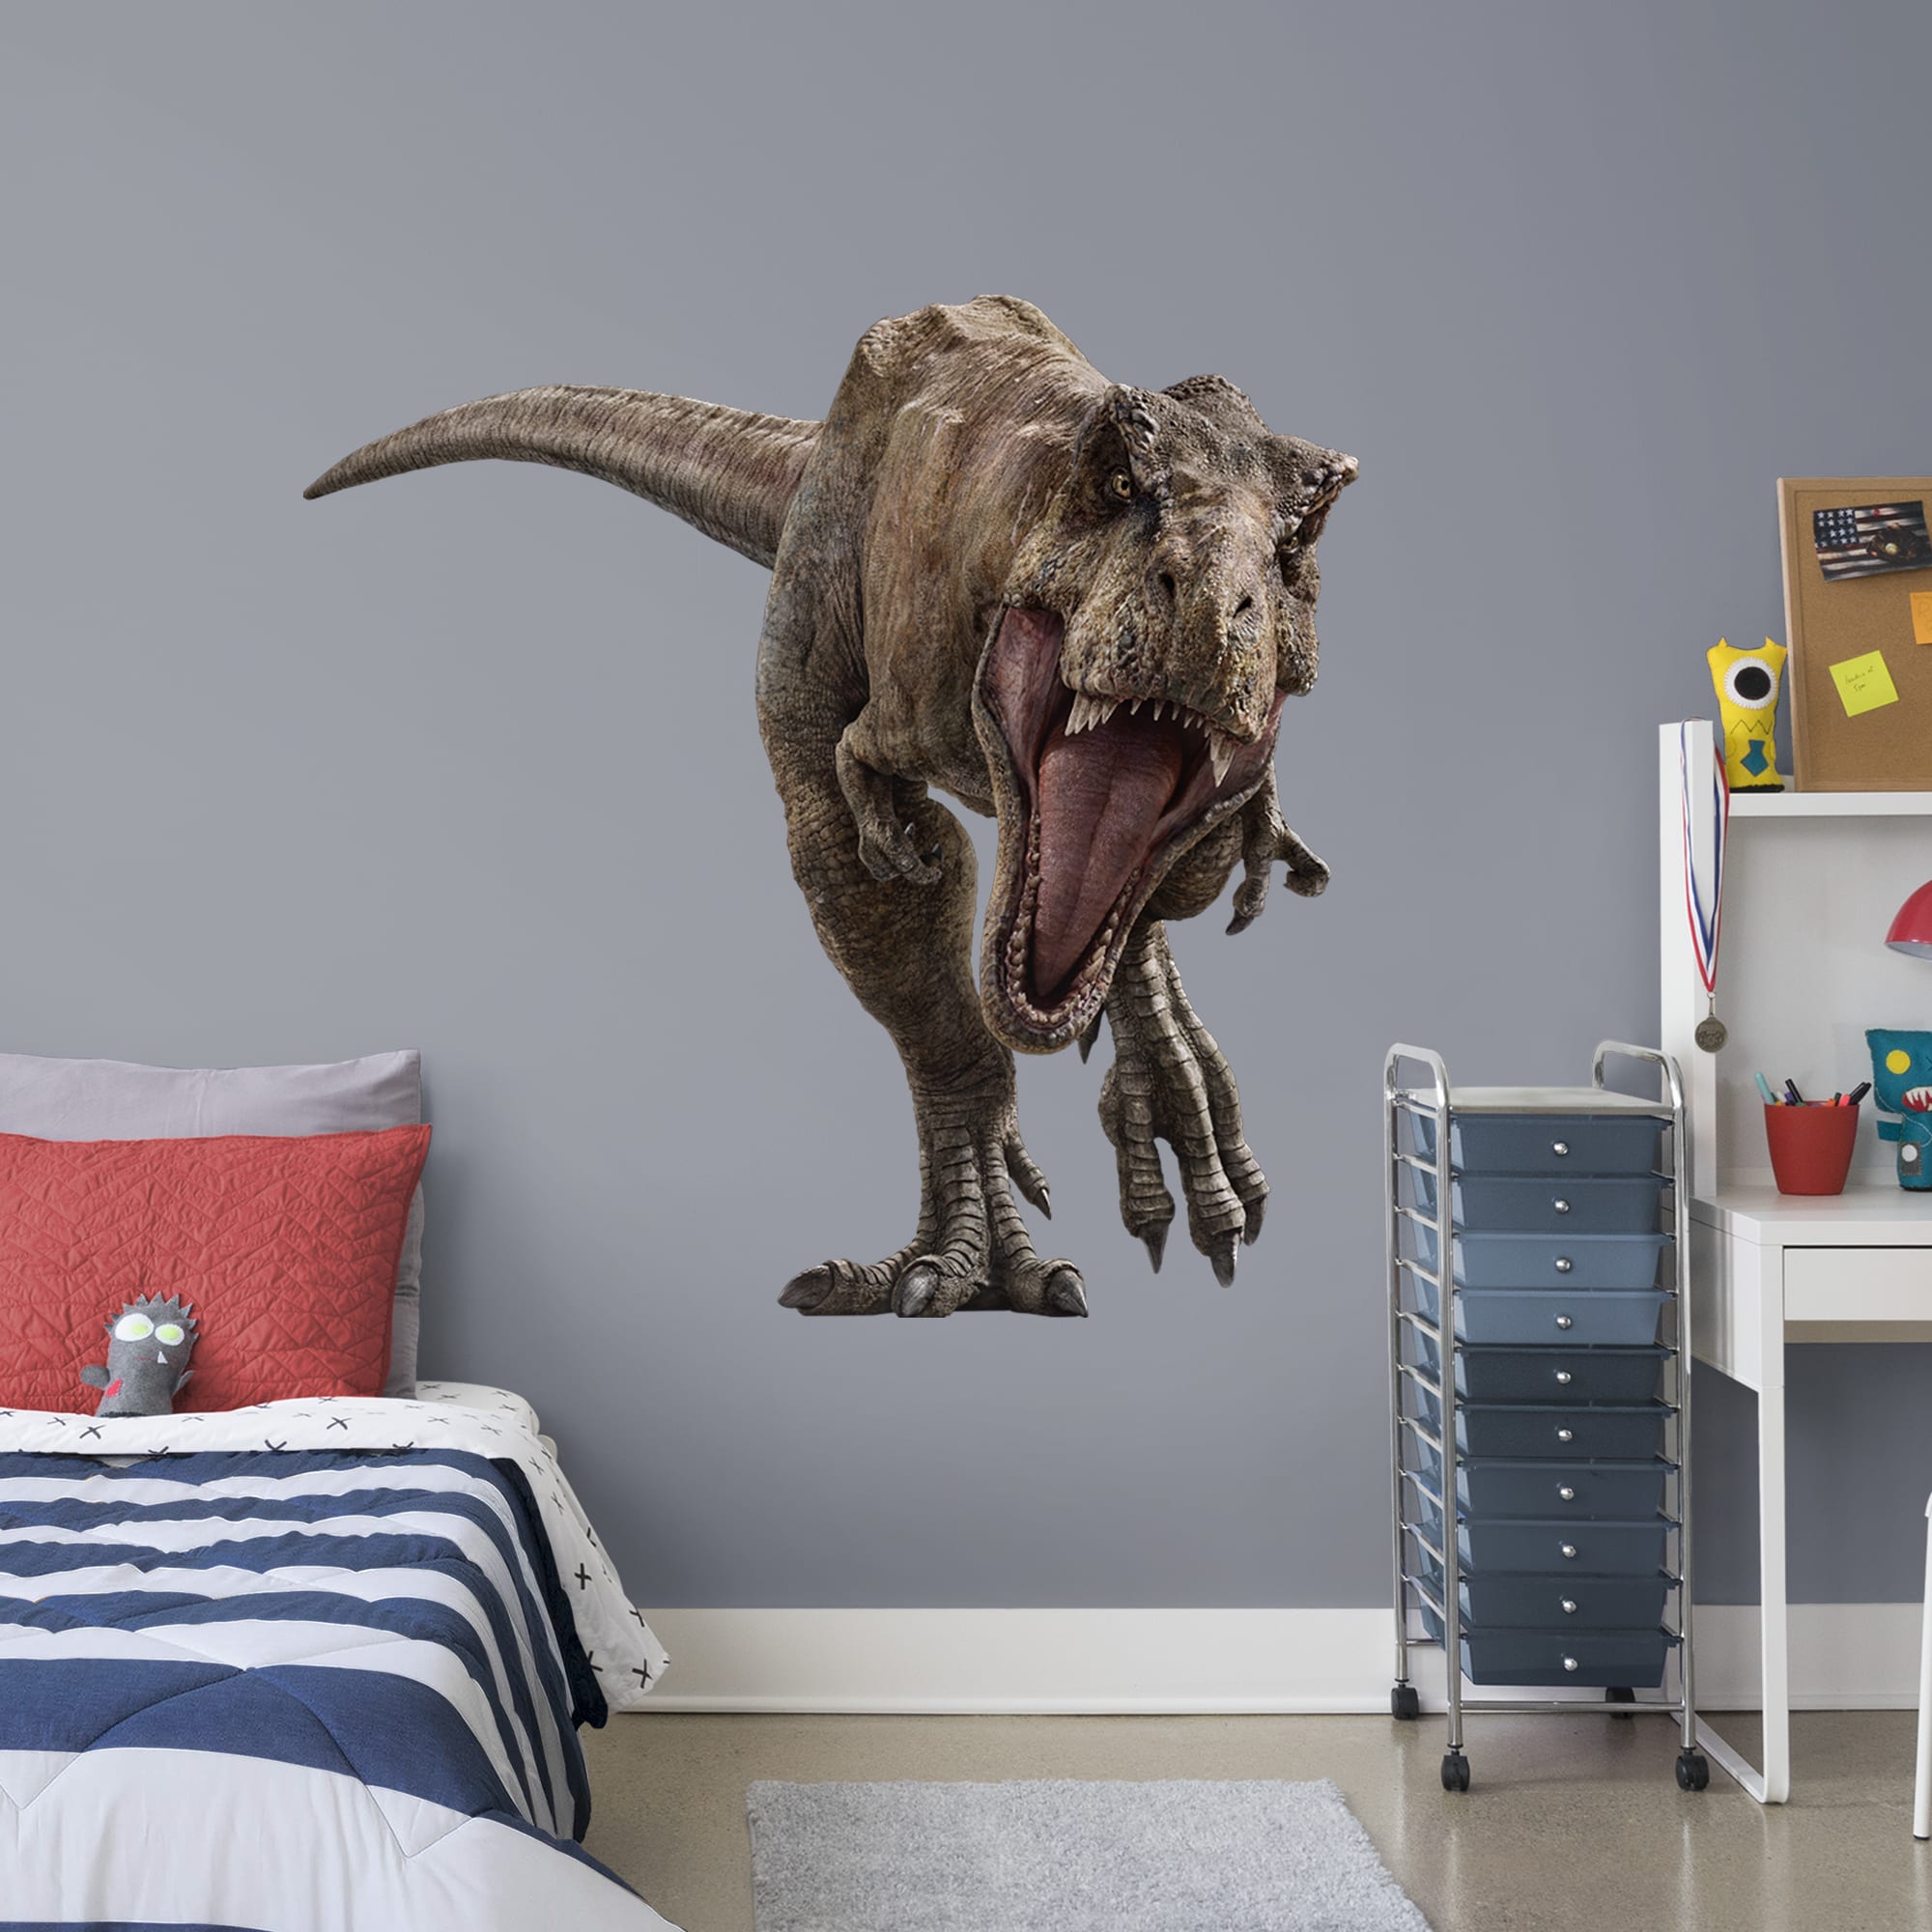 T-Rex - Jurassic World: Fallen Kingdom - Officially Licensed Removable Wall Decal Giant Character (52"W x 51"H) by Fathead | Vin